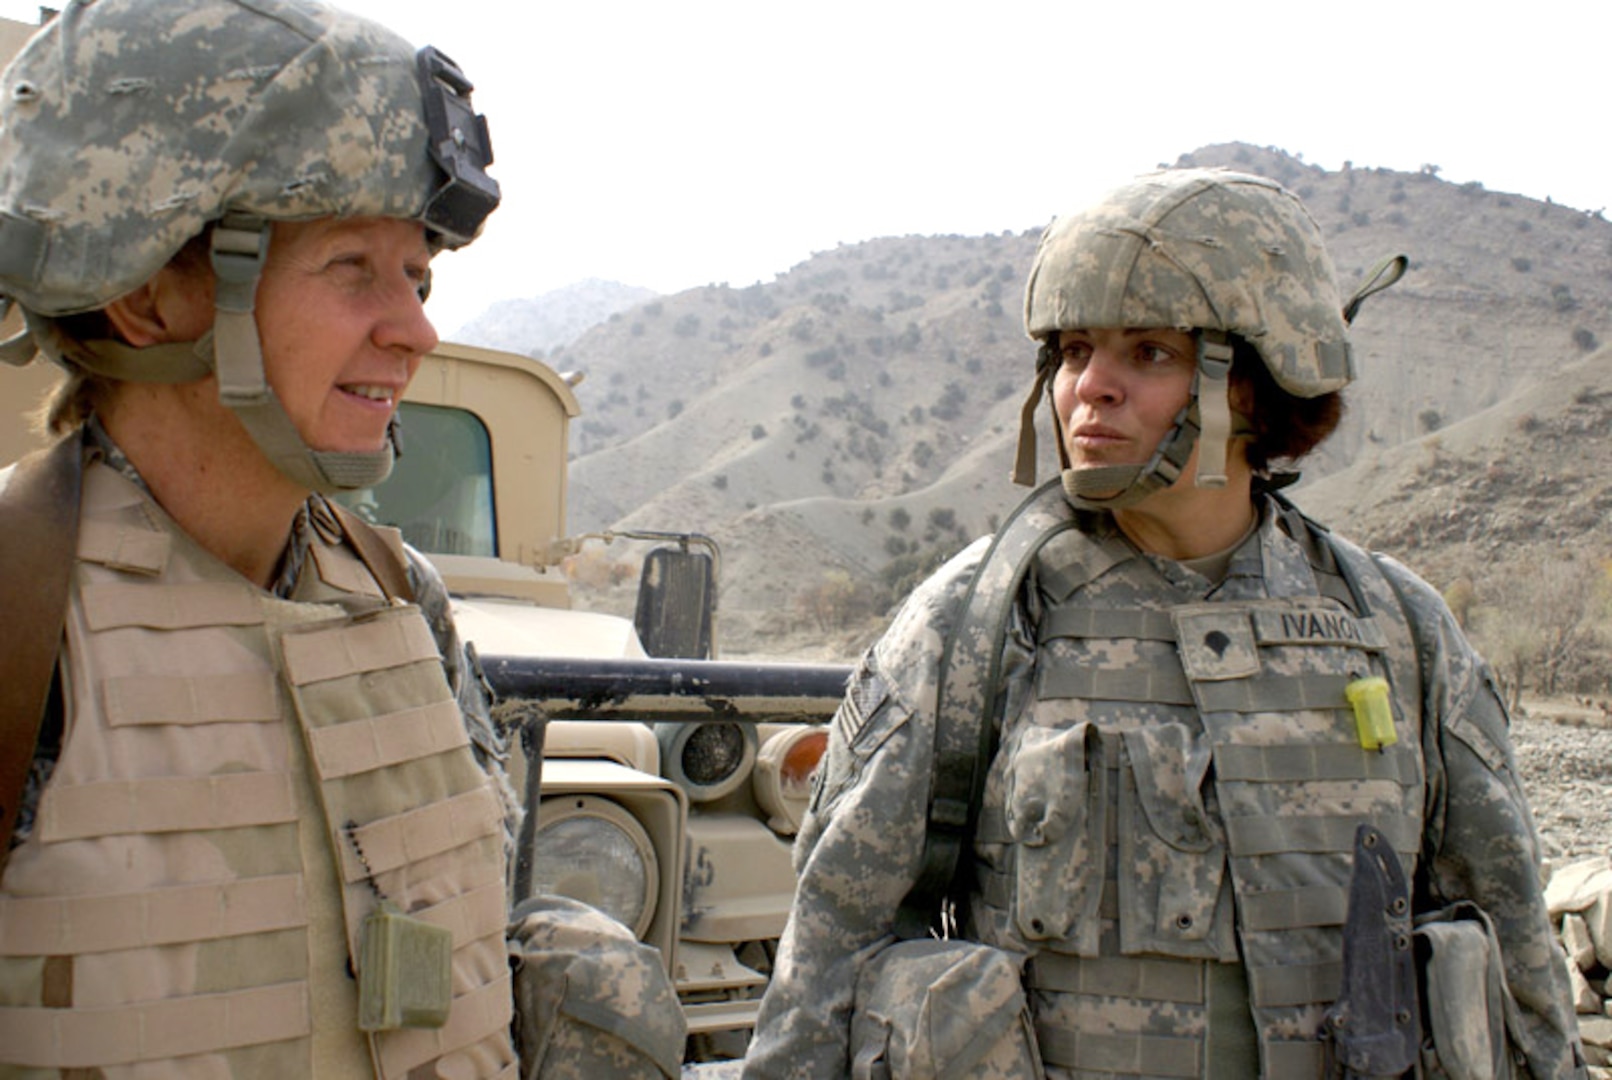 Oregon Army National Guard Staff Sgt. Jo Turner (left) and Spc. Cheryl Ivanov are battle buddies who stick together and help each other cope with the emotional and mental stress of combat operations in Afghanistan.